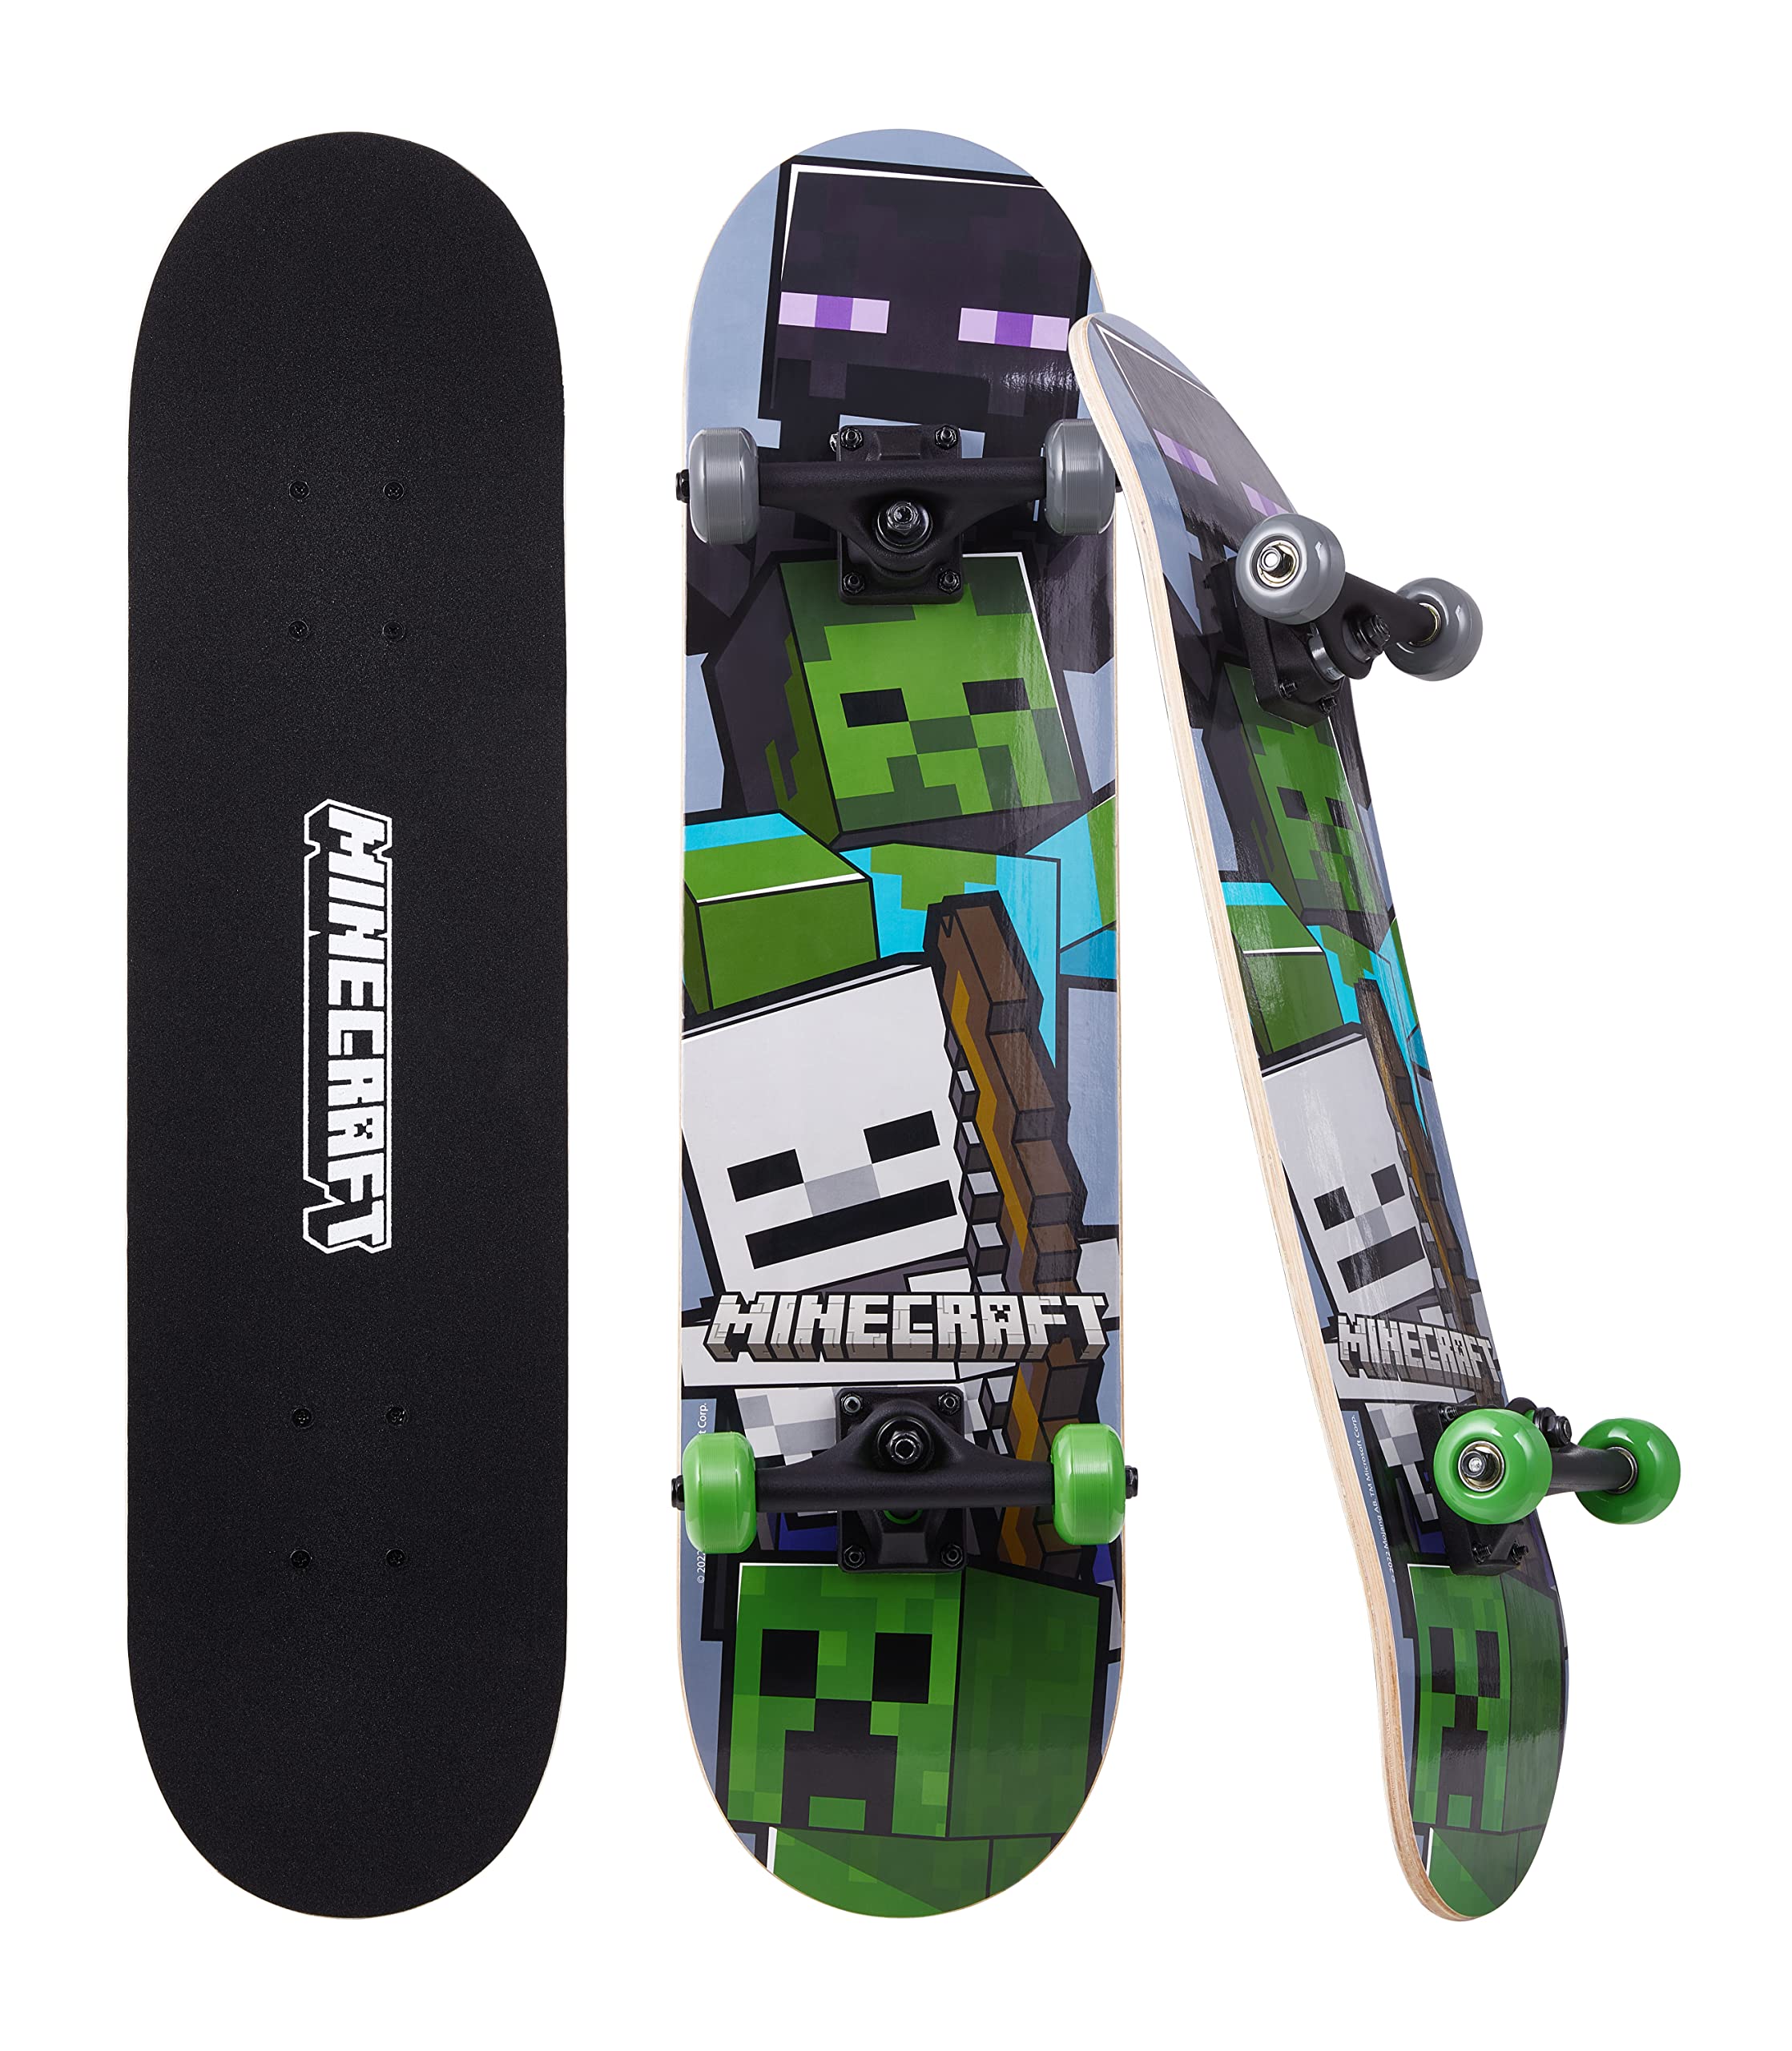 Minecraft 31 inch Skateboard, 9-ply Maple Deck Skate Board for Cruising, Carving, Tricks and Downhill